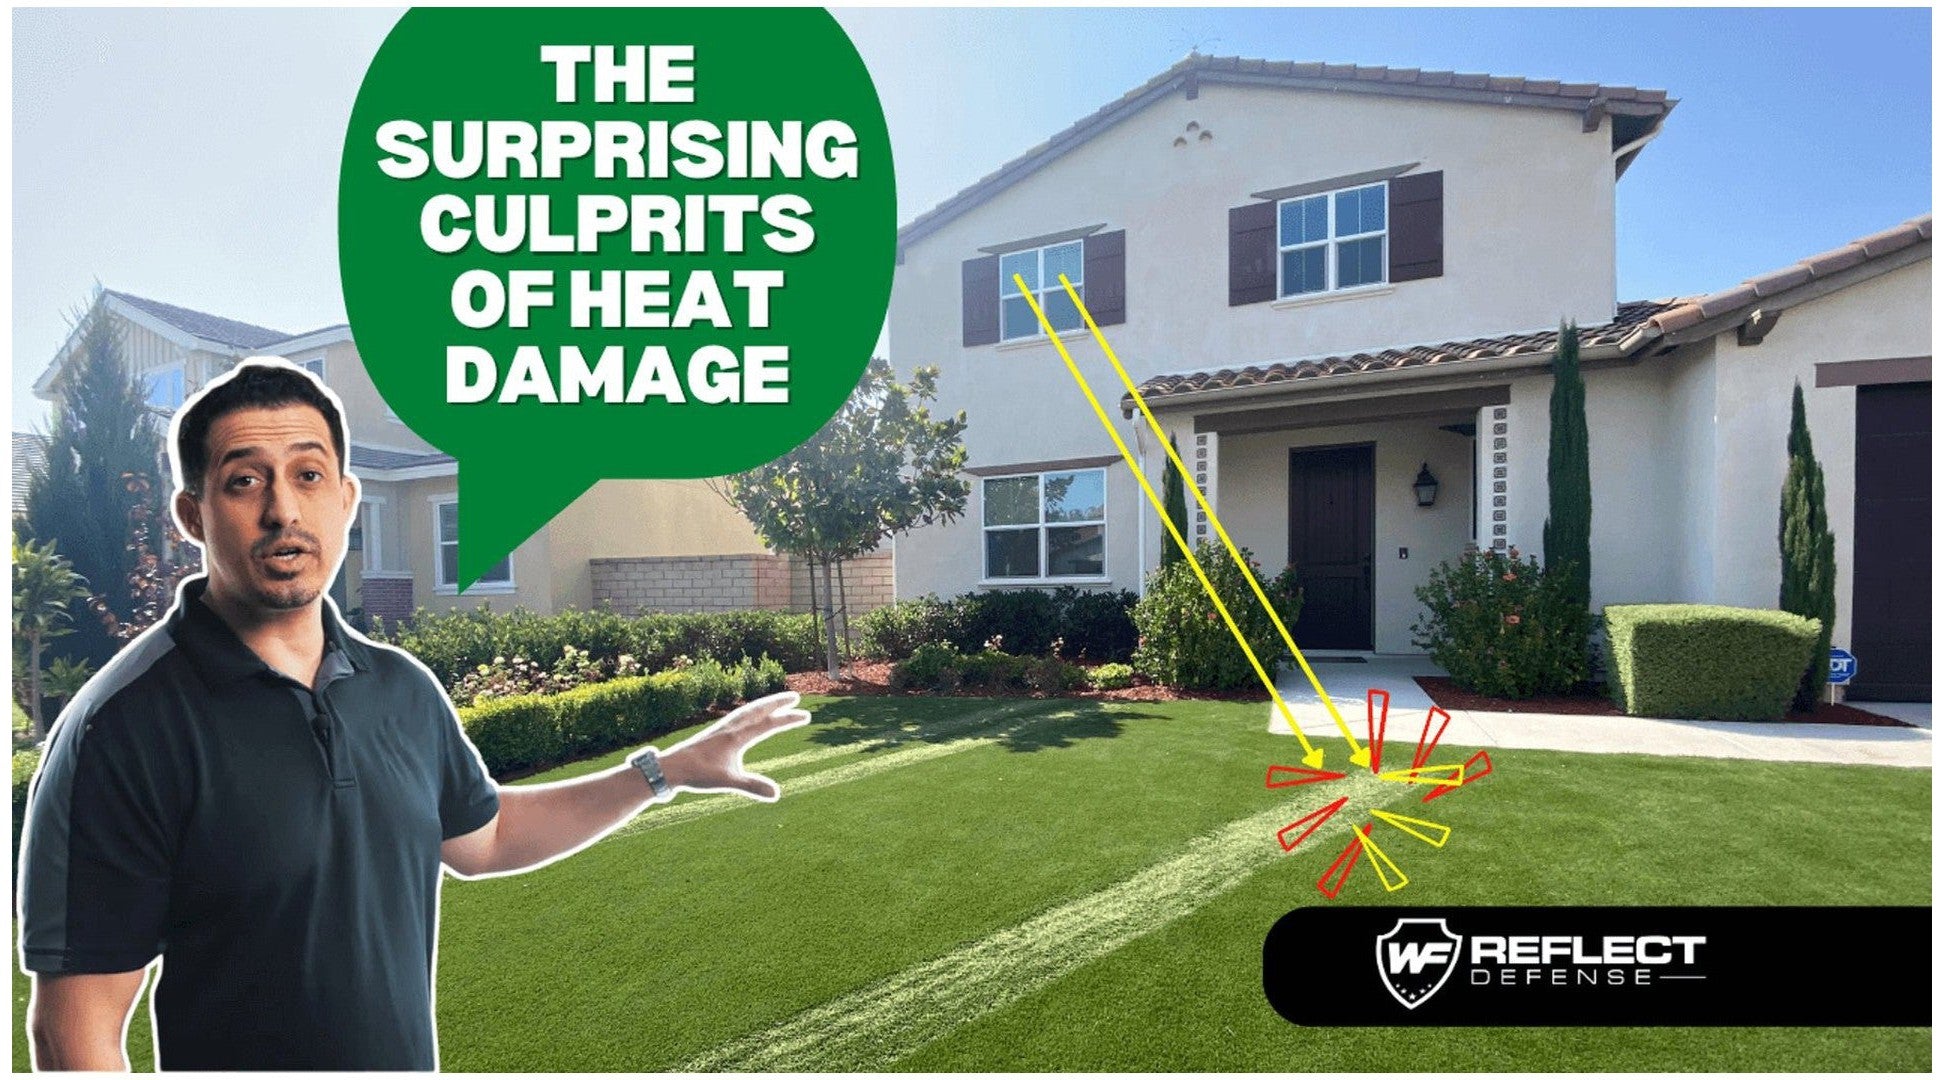 Is Your Artificial Lawn Cooking? The Surprising Culprits of Heat Damage